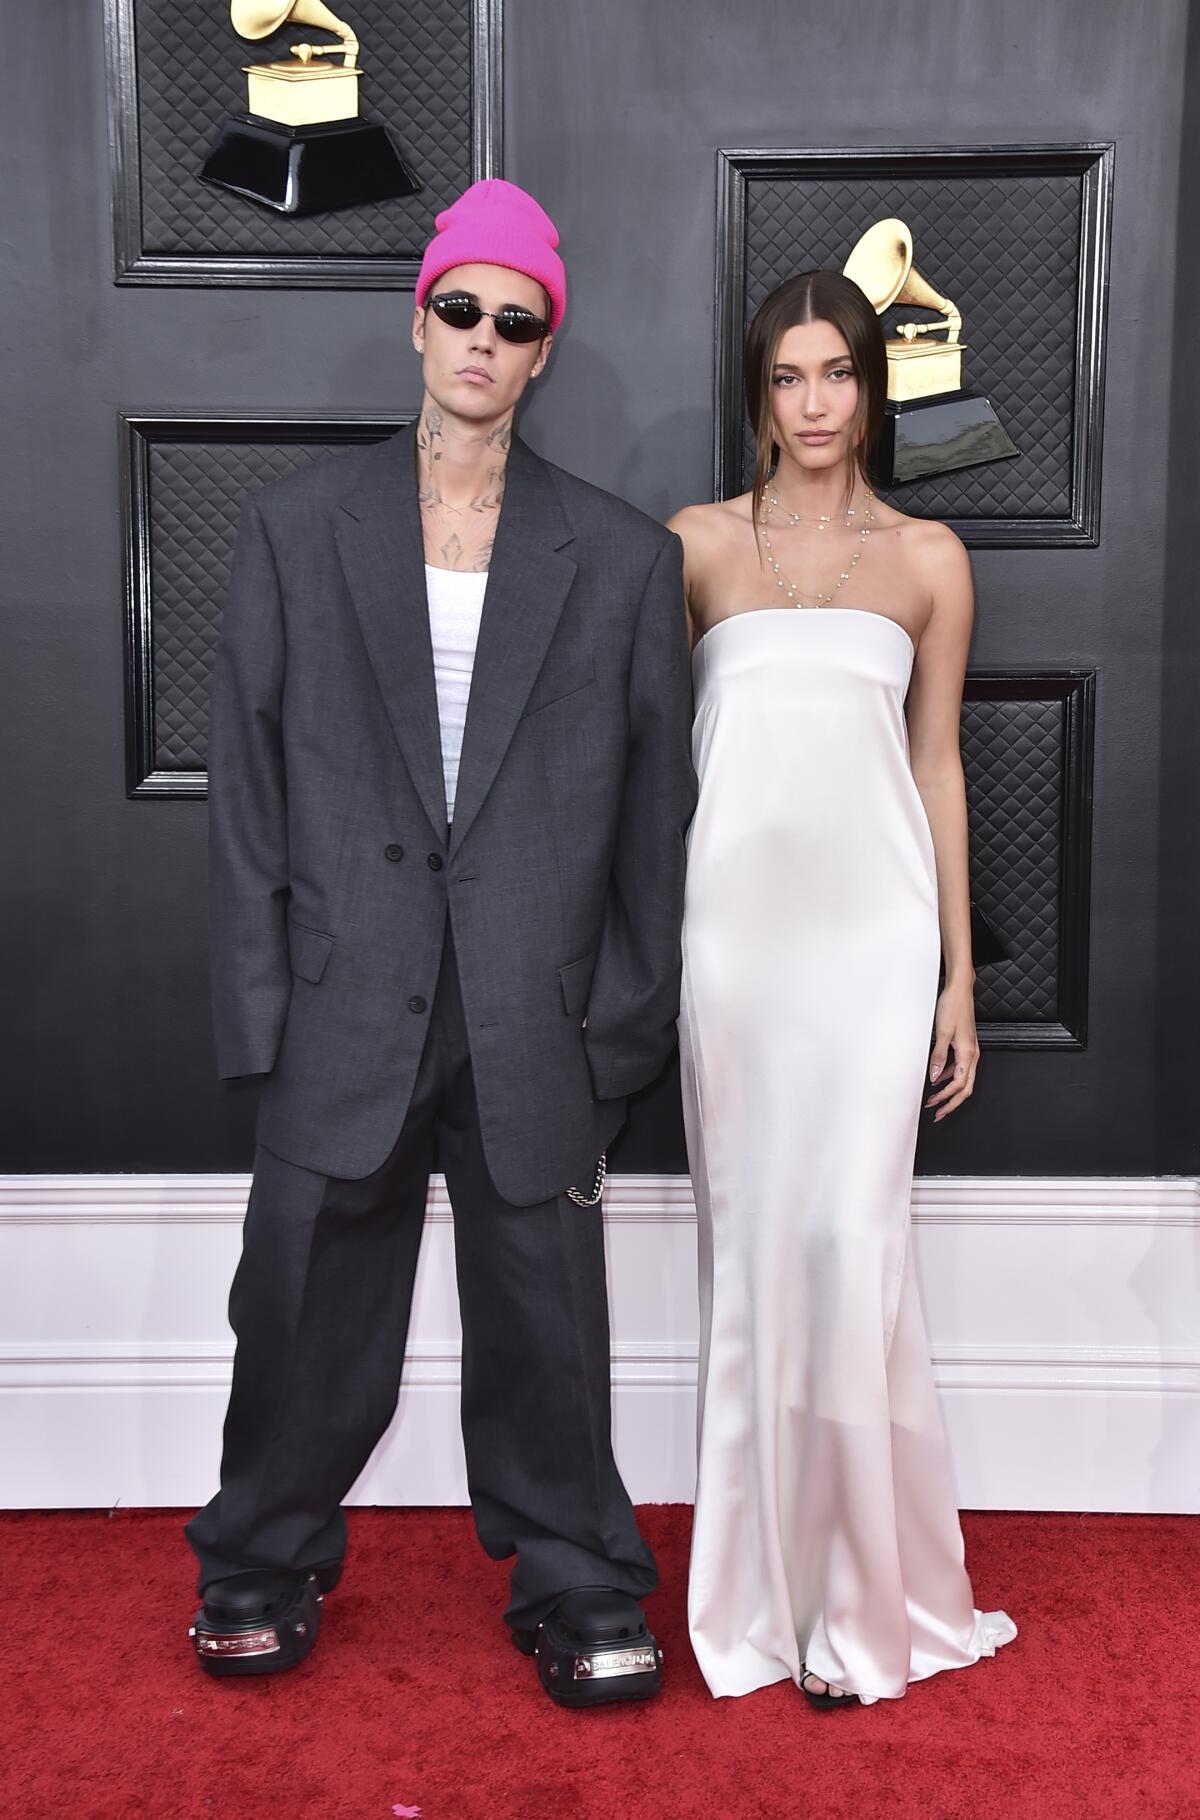 A man in an oversize suit and a pink beanie stands next to a woman in a white gown on a red carpet.